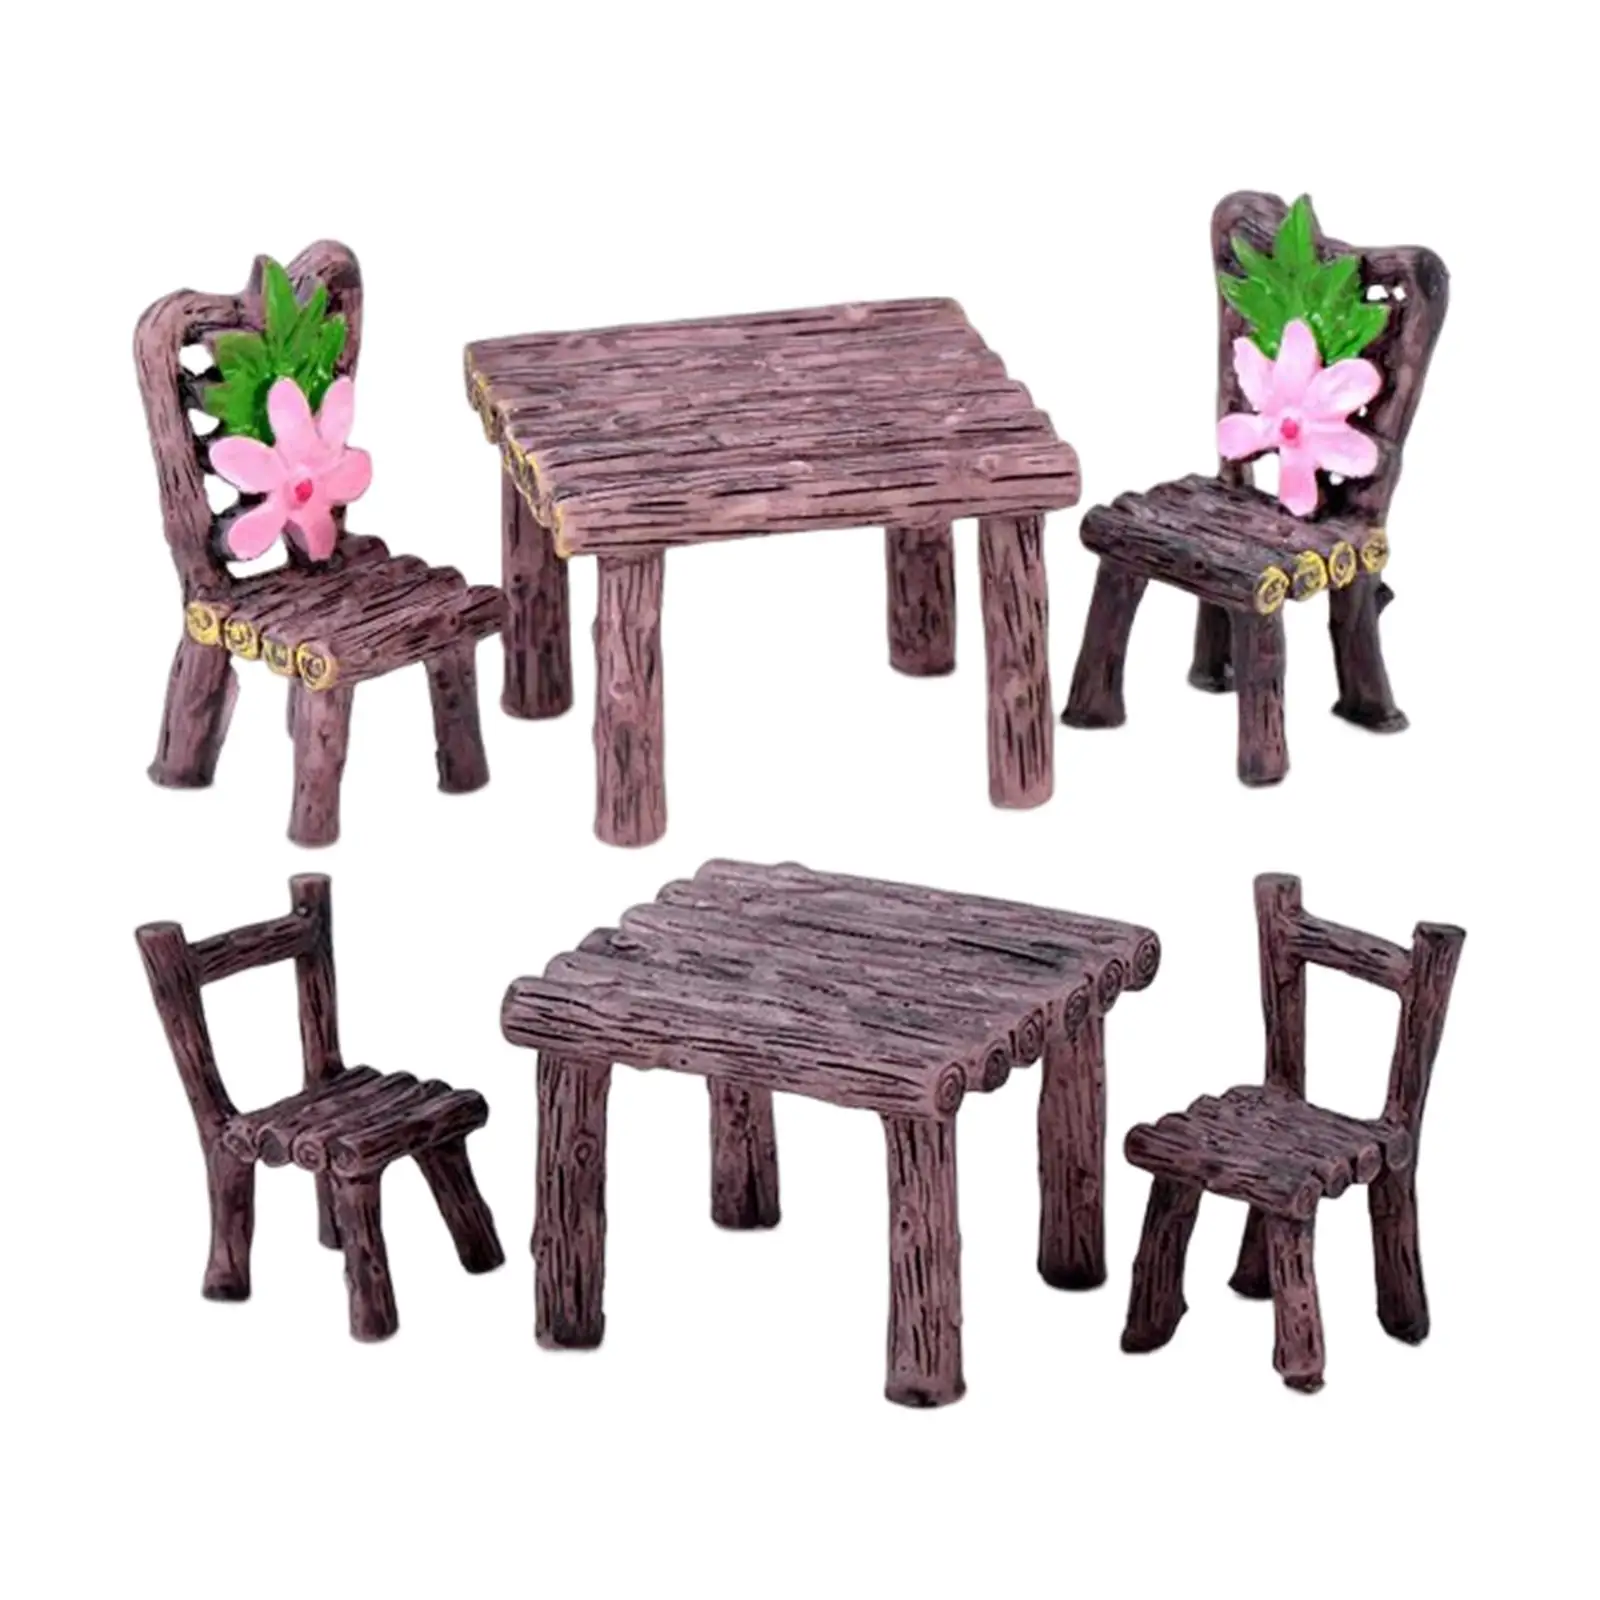 Miniature Table Chairs Set Toys Ornament Resin Figurines Sculpture for DIY Projects Sand Table Fairy Garden Street Building